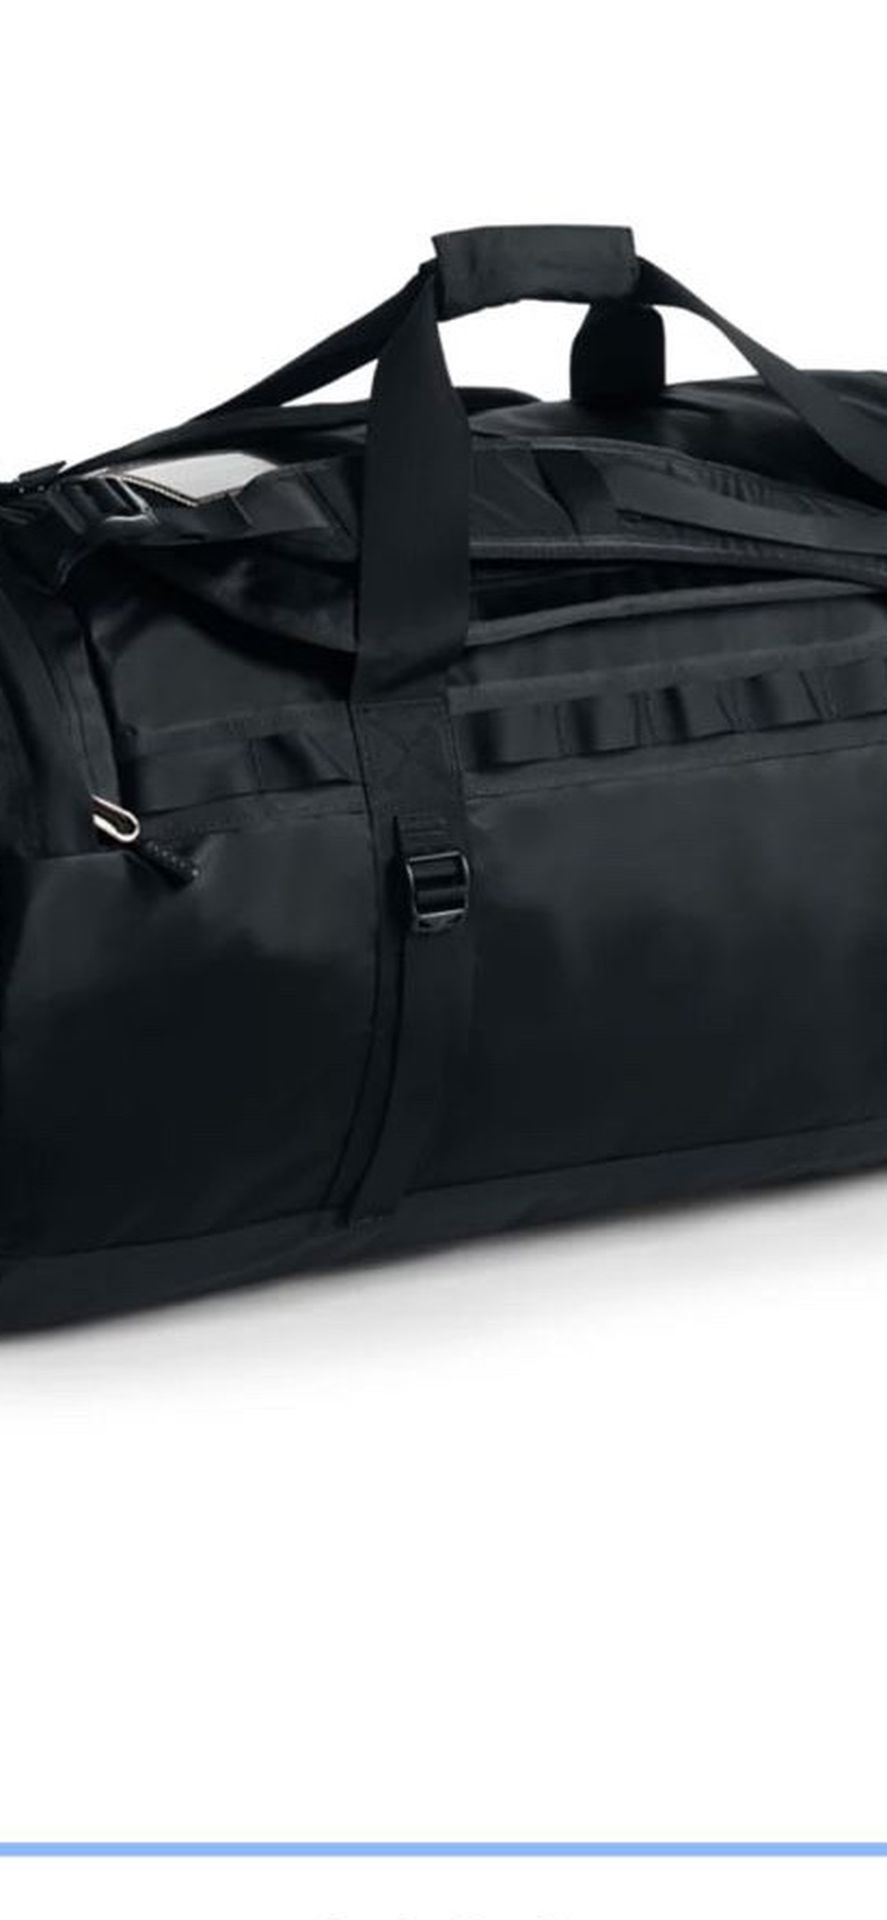 North Face Duffle Bag (large)